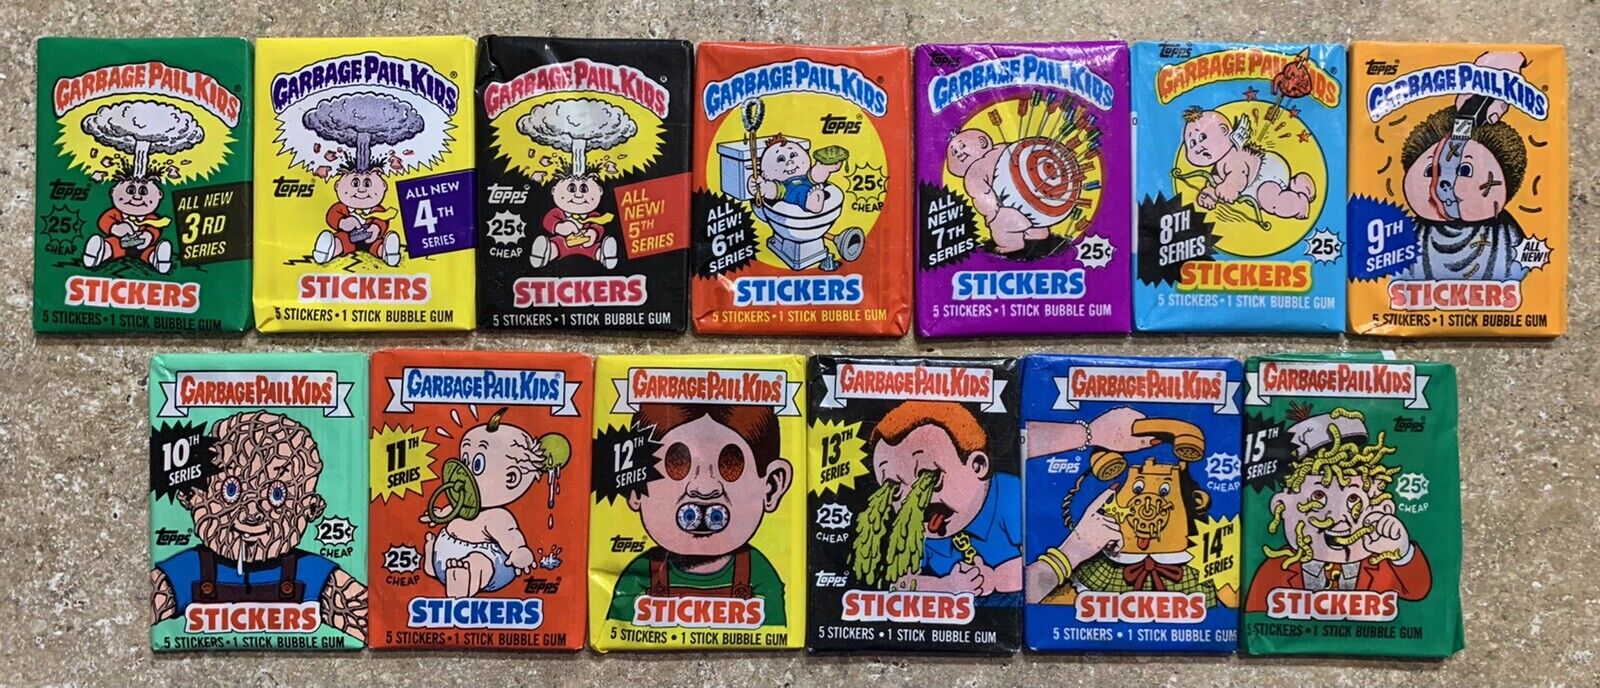 1986-88 Garbage Pail Kids 13-Unopened Wax Pack Lot 3rd-15th Series-NICE LOT! TWT Без бренда